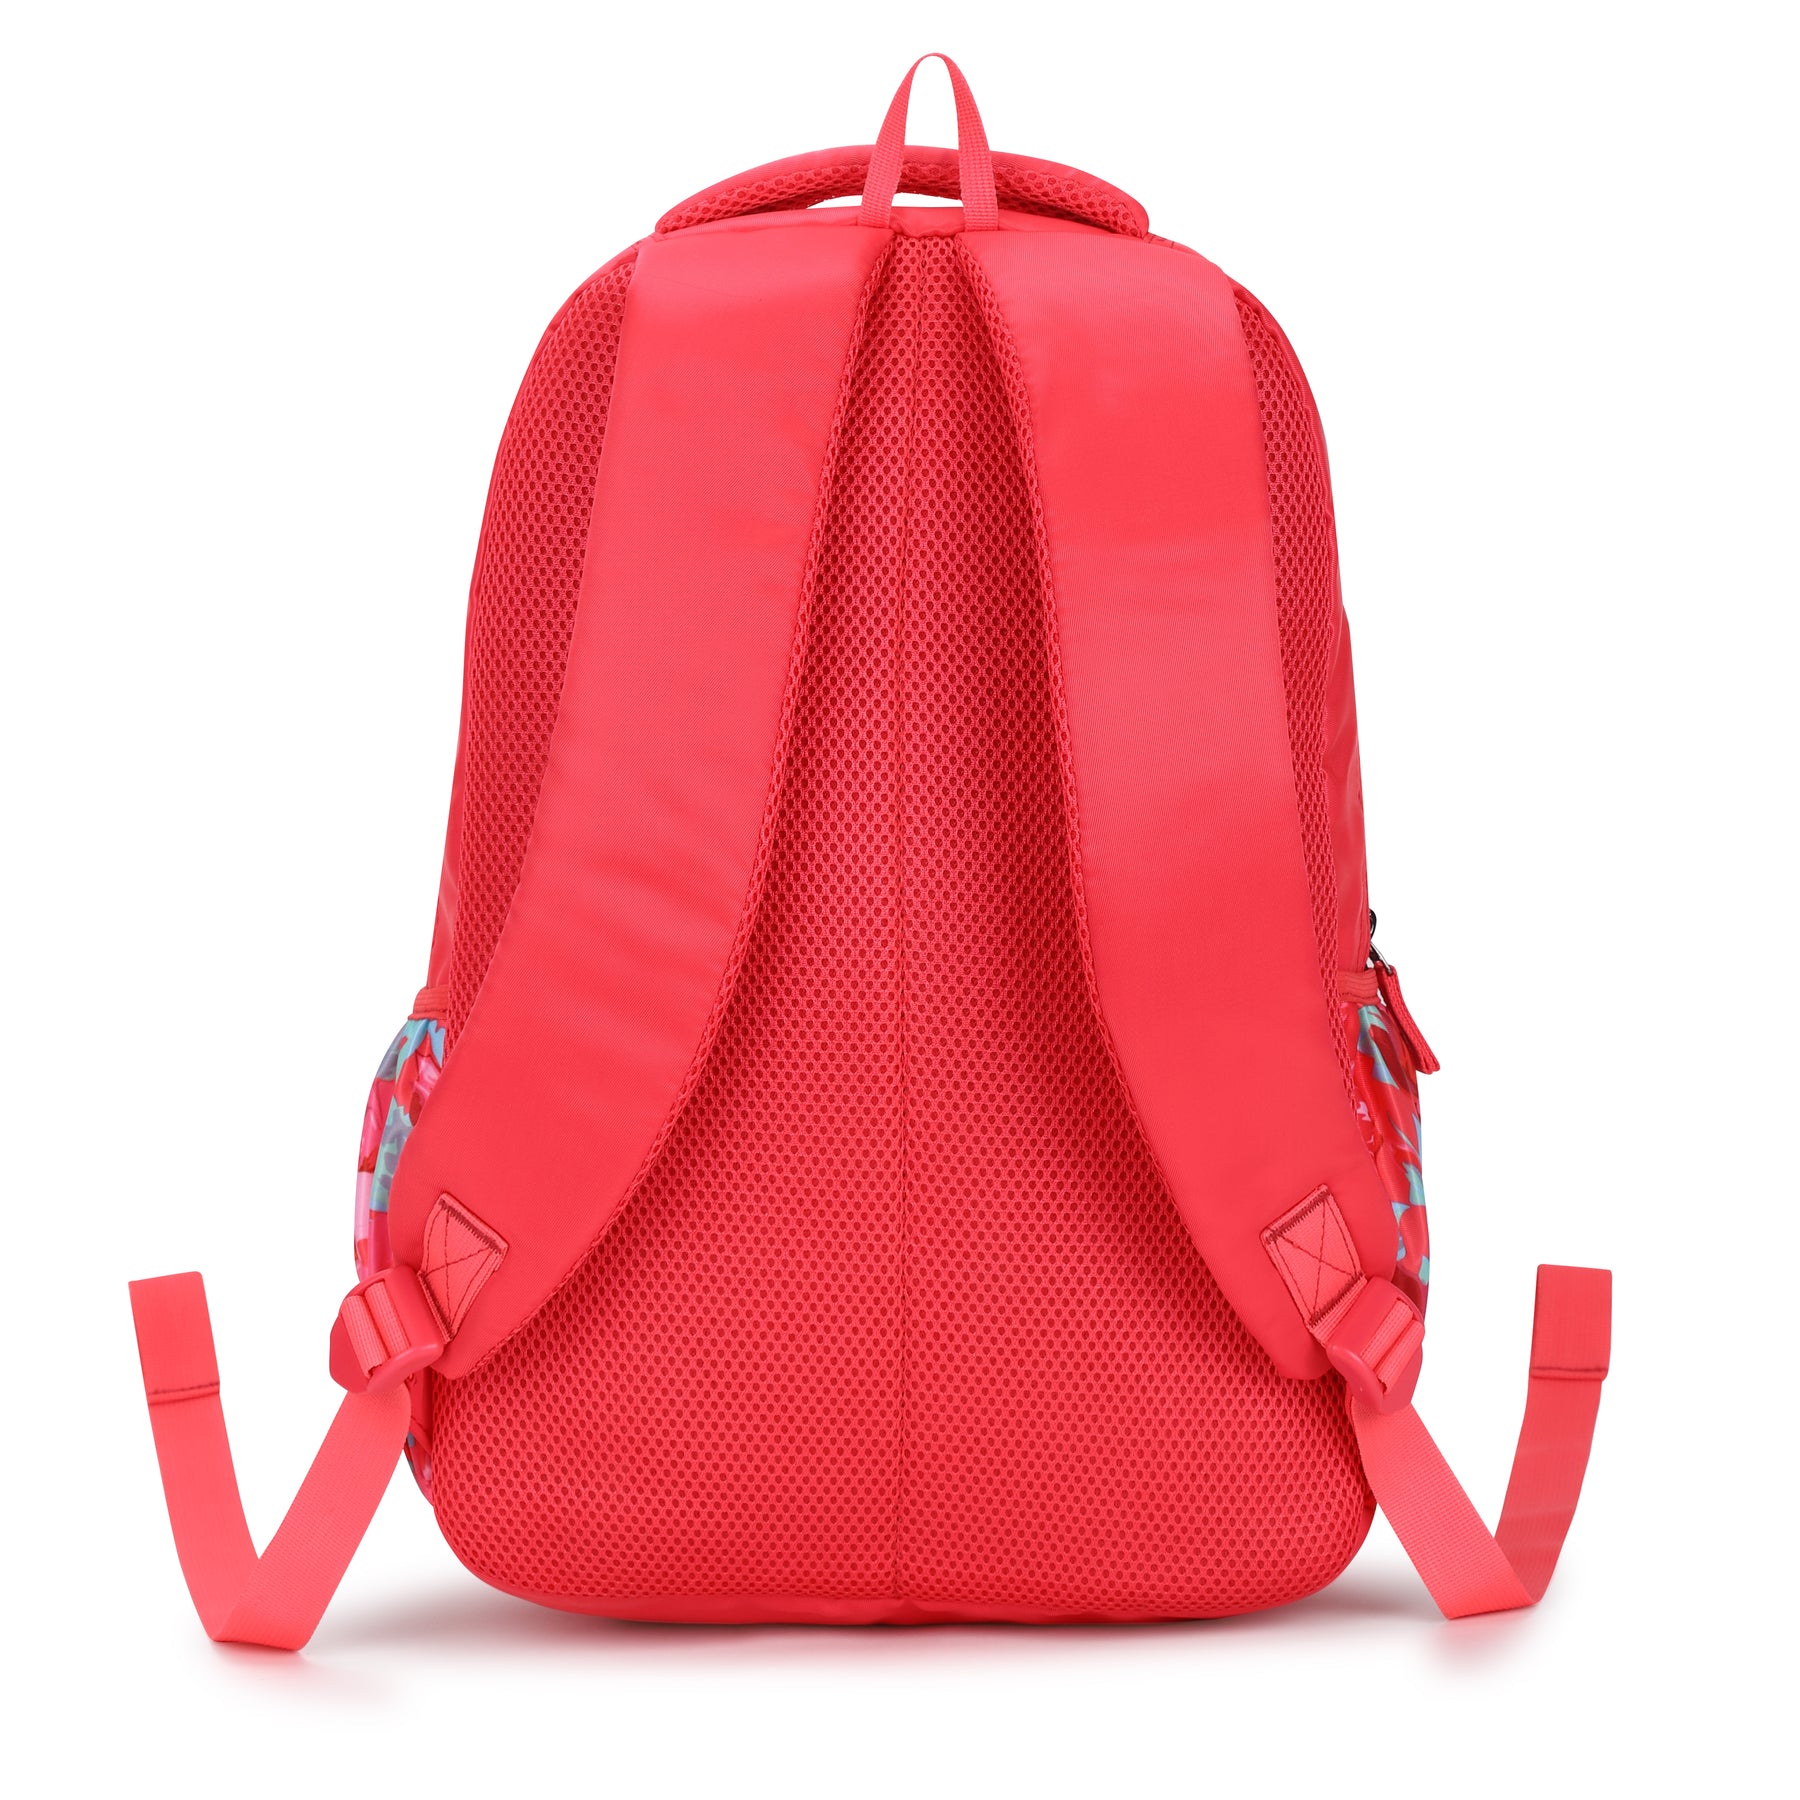 Genie Valentine 27L Pink School Backpack With Easy Access Pockets